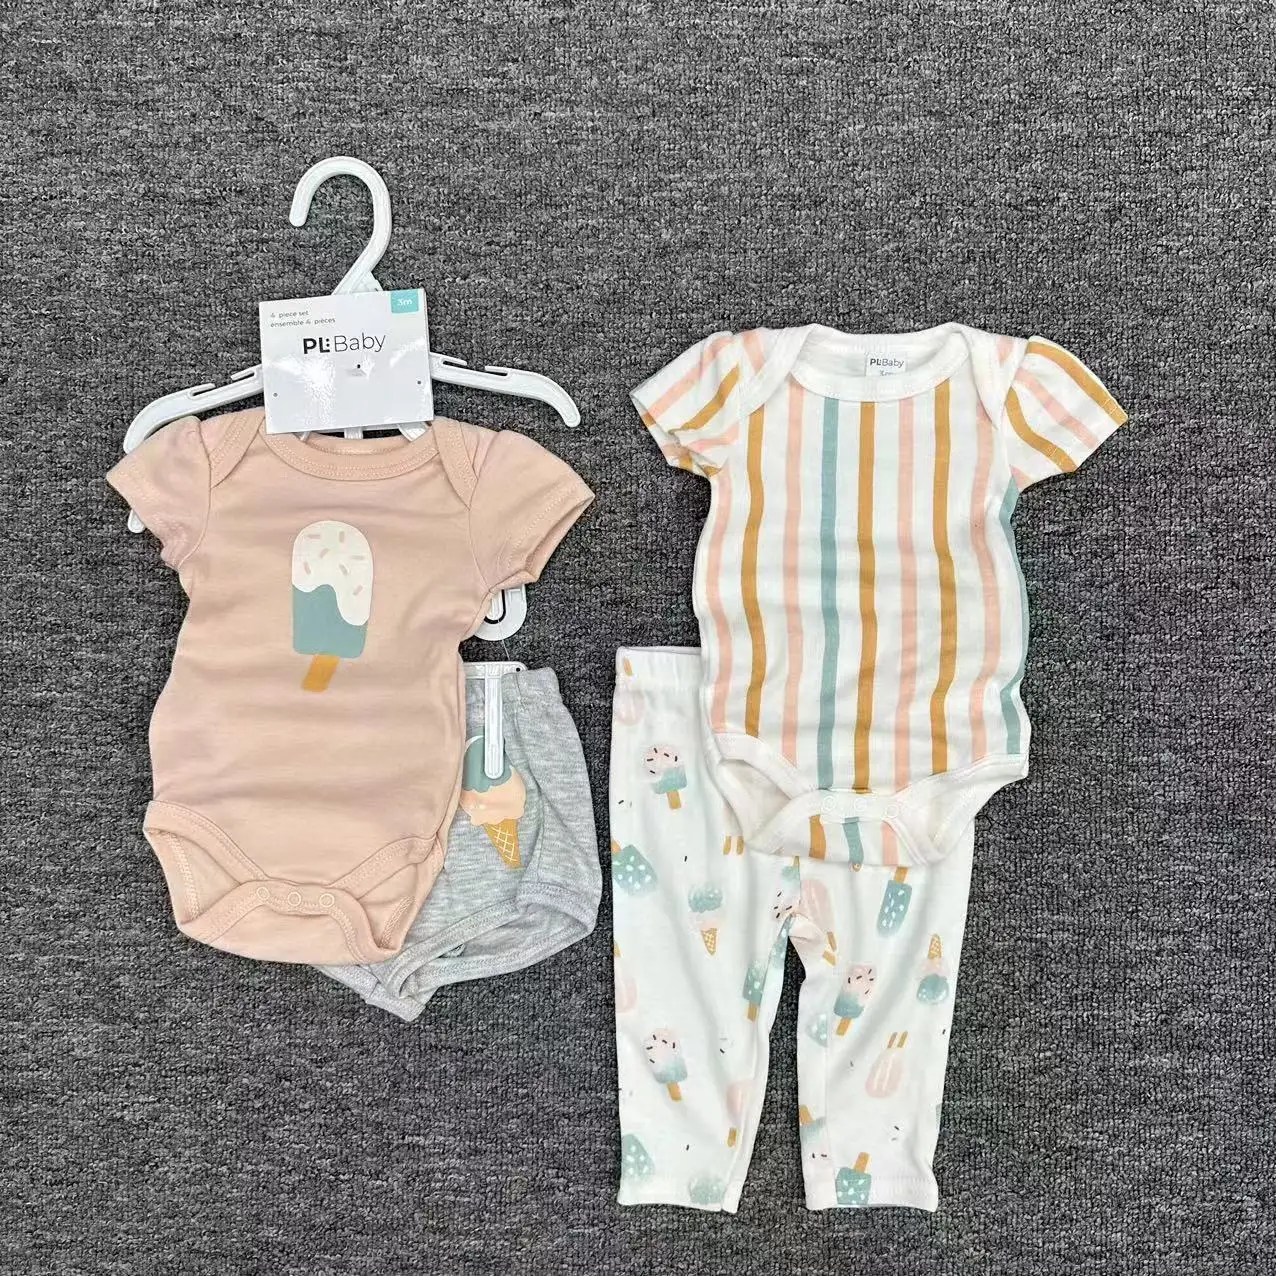 New arrival High quality100% Cotton Newborn Baby Kid Girls Short Sleeves Romper boy Onesies Sets Clothes 4 In 1 Set